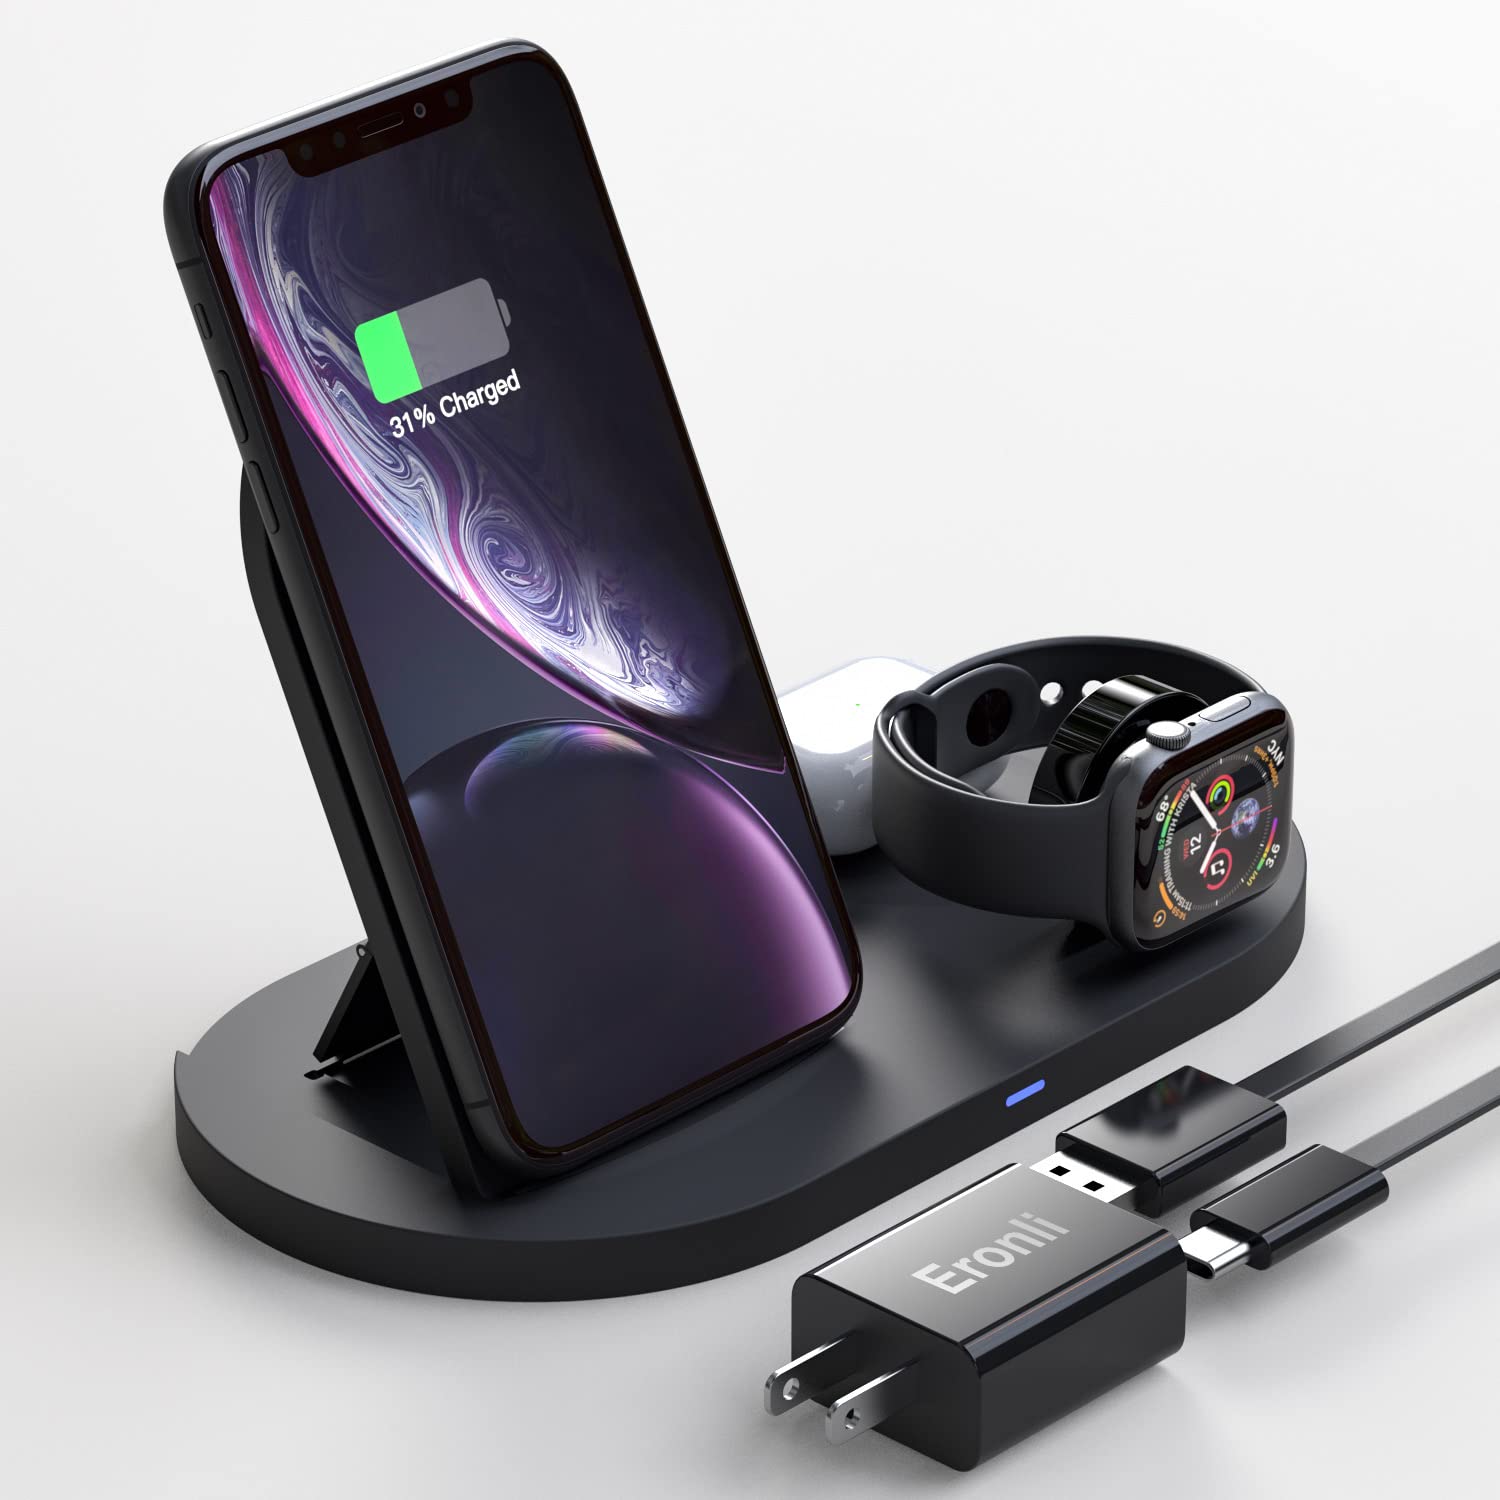 Wireless charging: Explore the convenience of wireless charging options available for both Android and iPhone devices.
USB-C charging: Learn about the benefits of using USB-C charging cables and adapters for faster and more efficient charging.